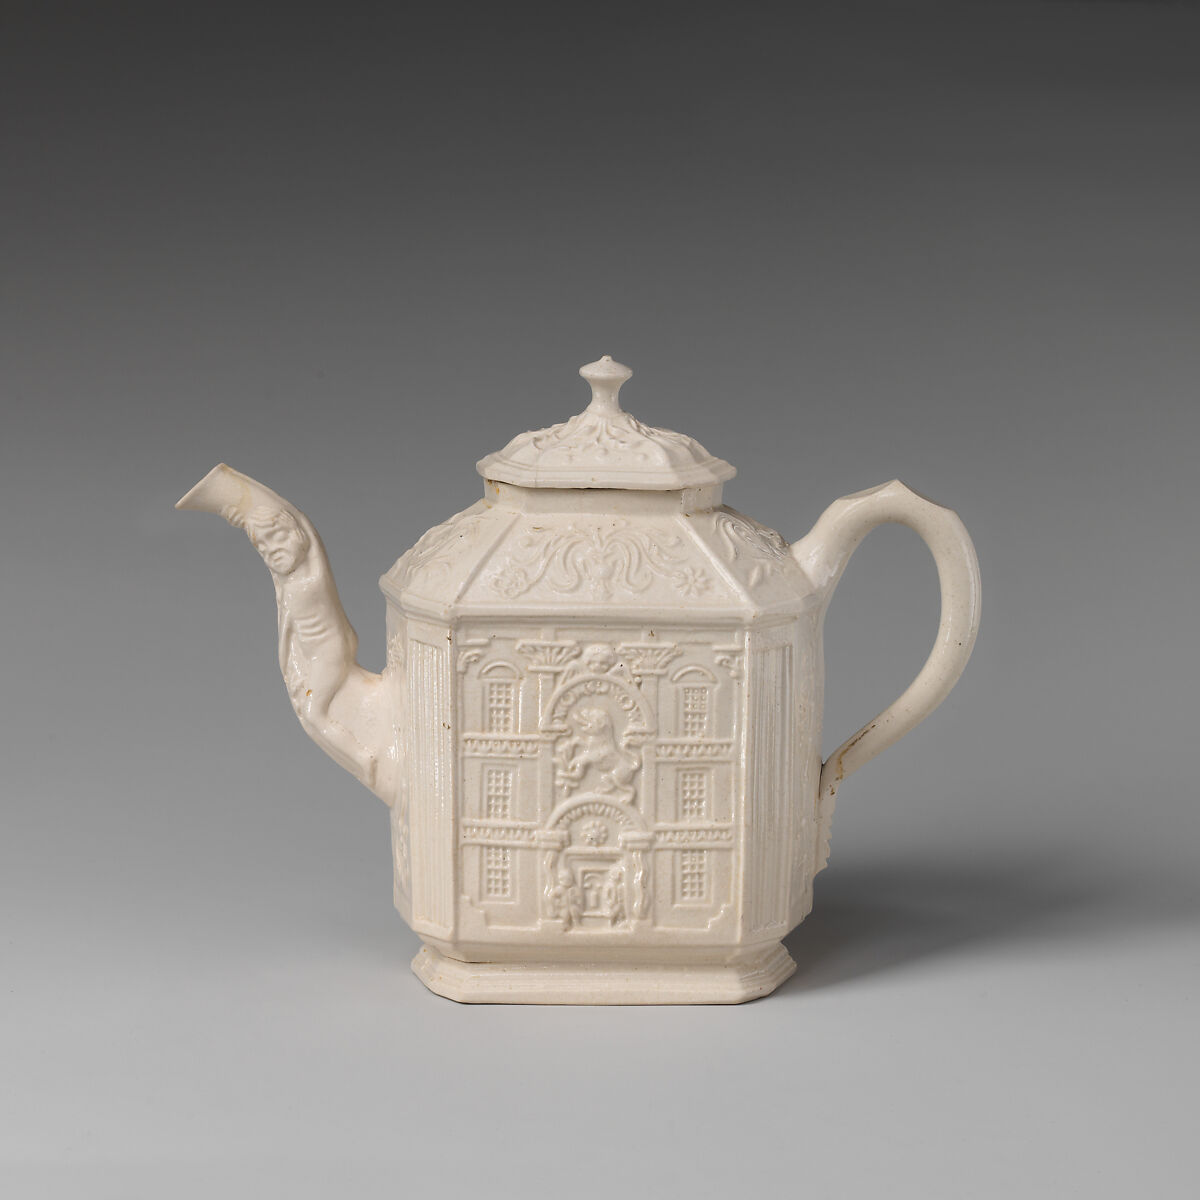 Teapot in the form of a house, Salt-glazed stoneware, British, Staffordshire 